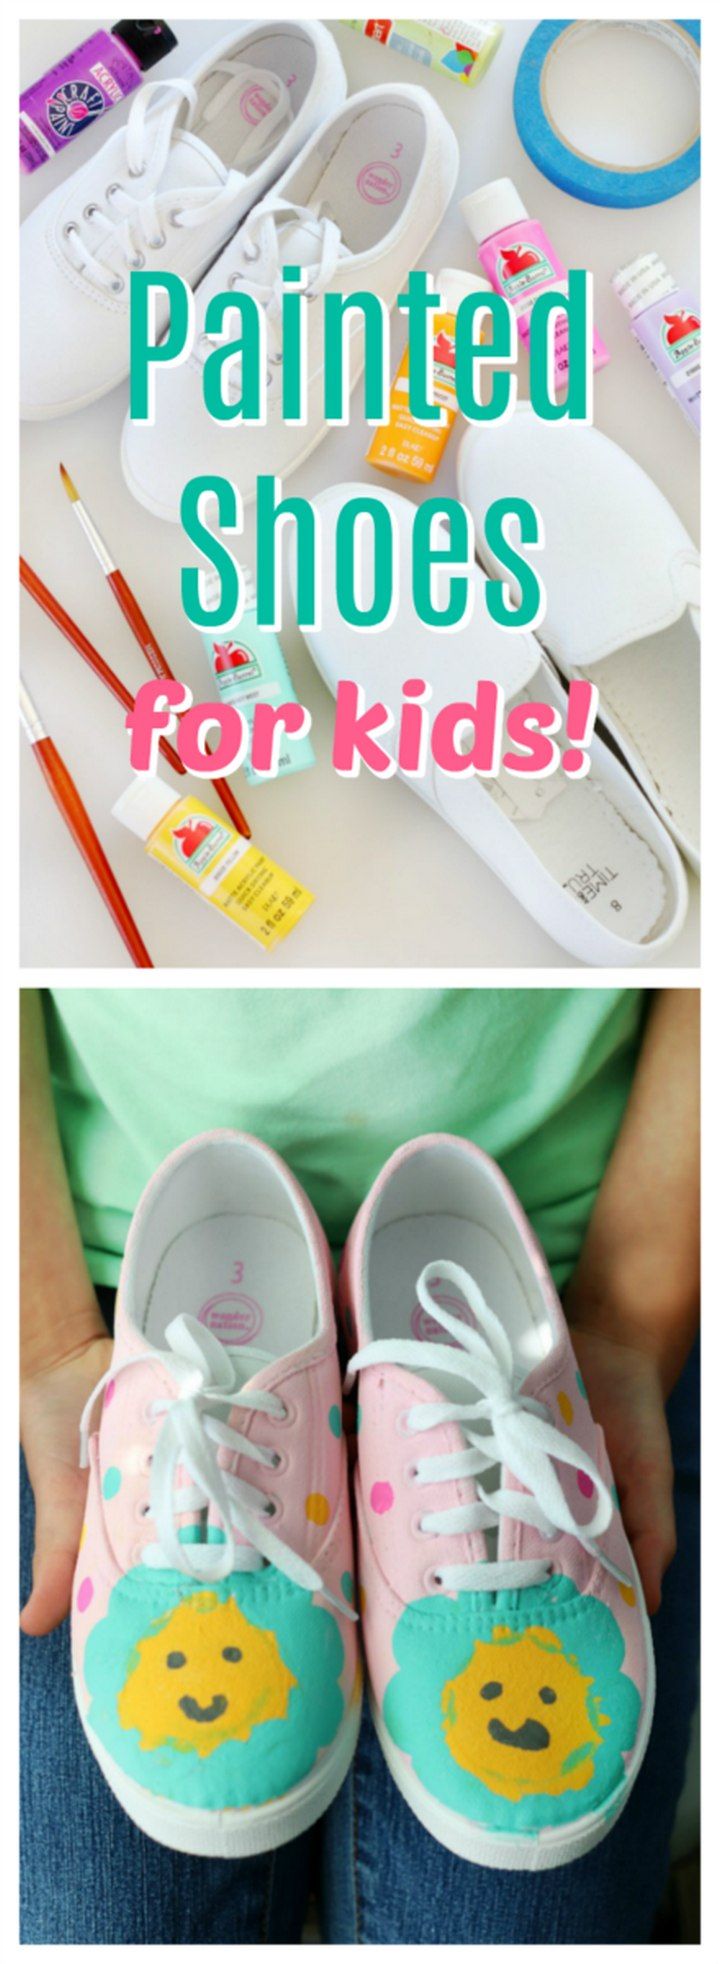 Painted Shoes For Kids With Acrylic or Fabric Pai